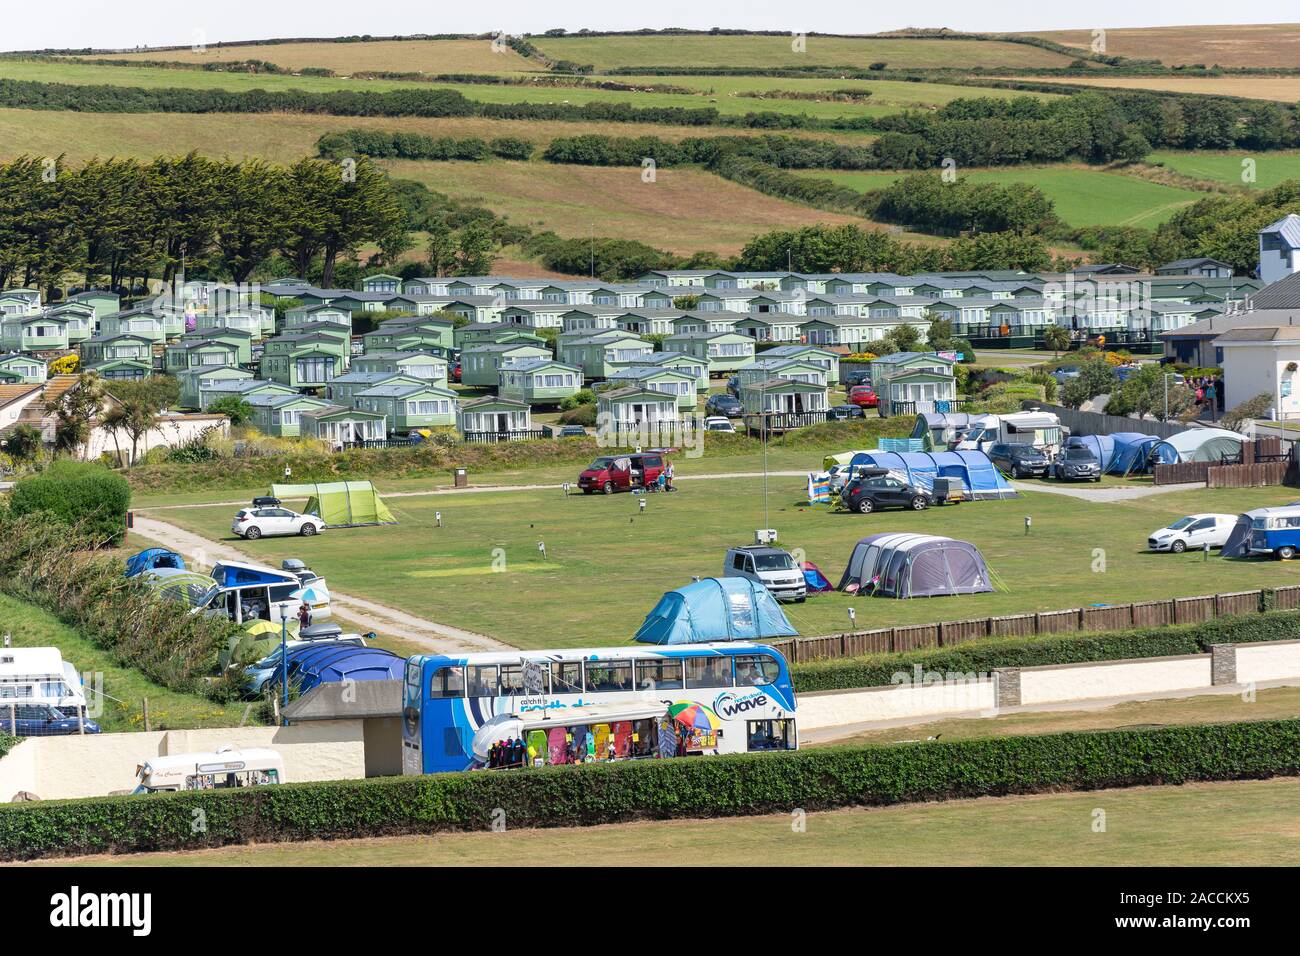 Campsite and holiday cabins from Croyde Beach, Croyde, Devon, England, United Kingdom Stock Photo